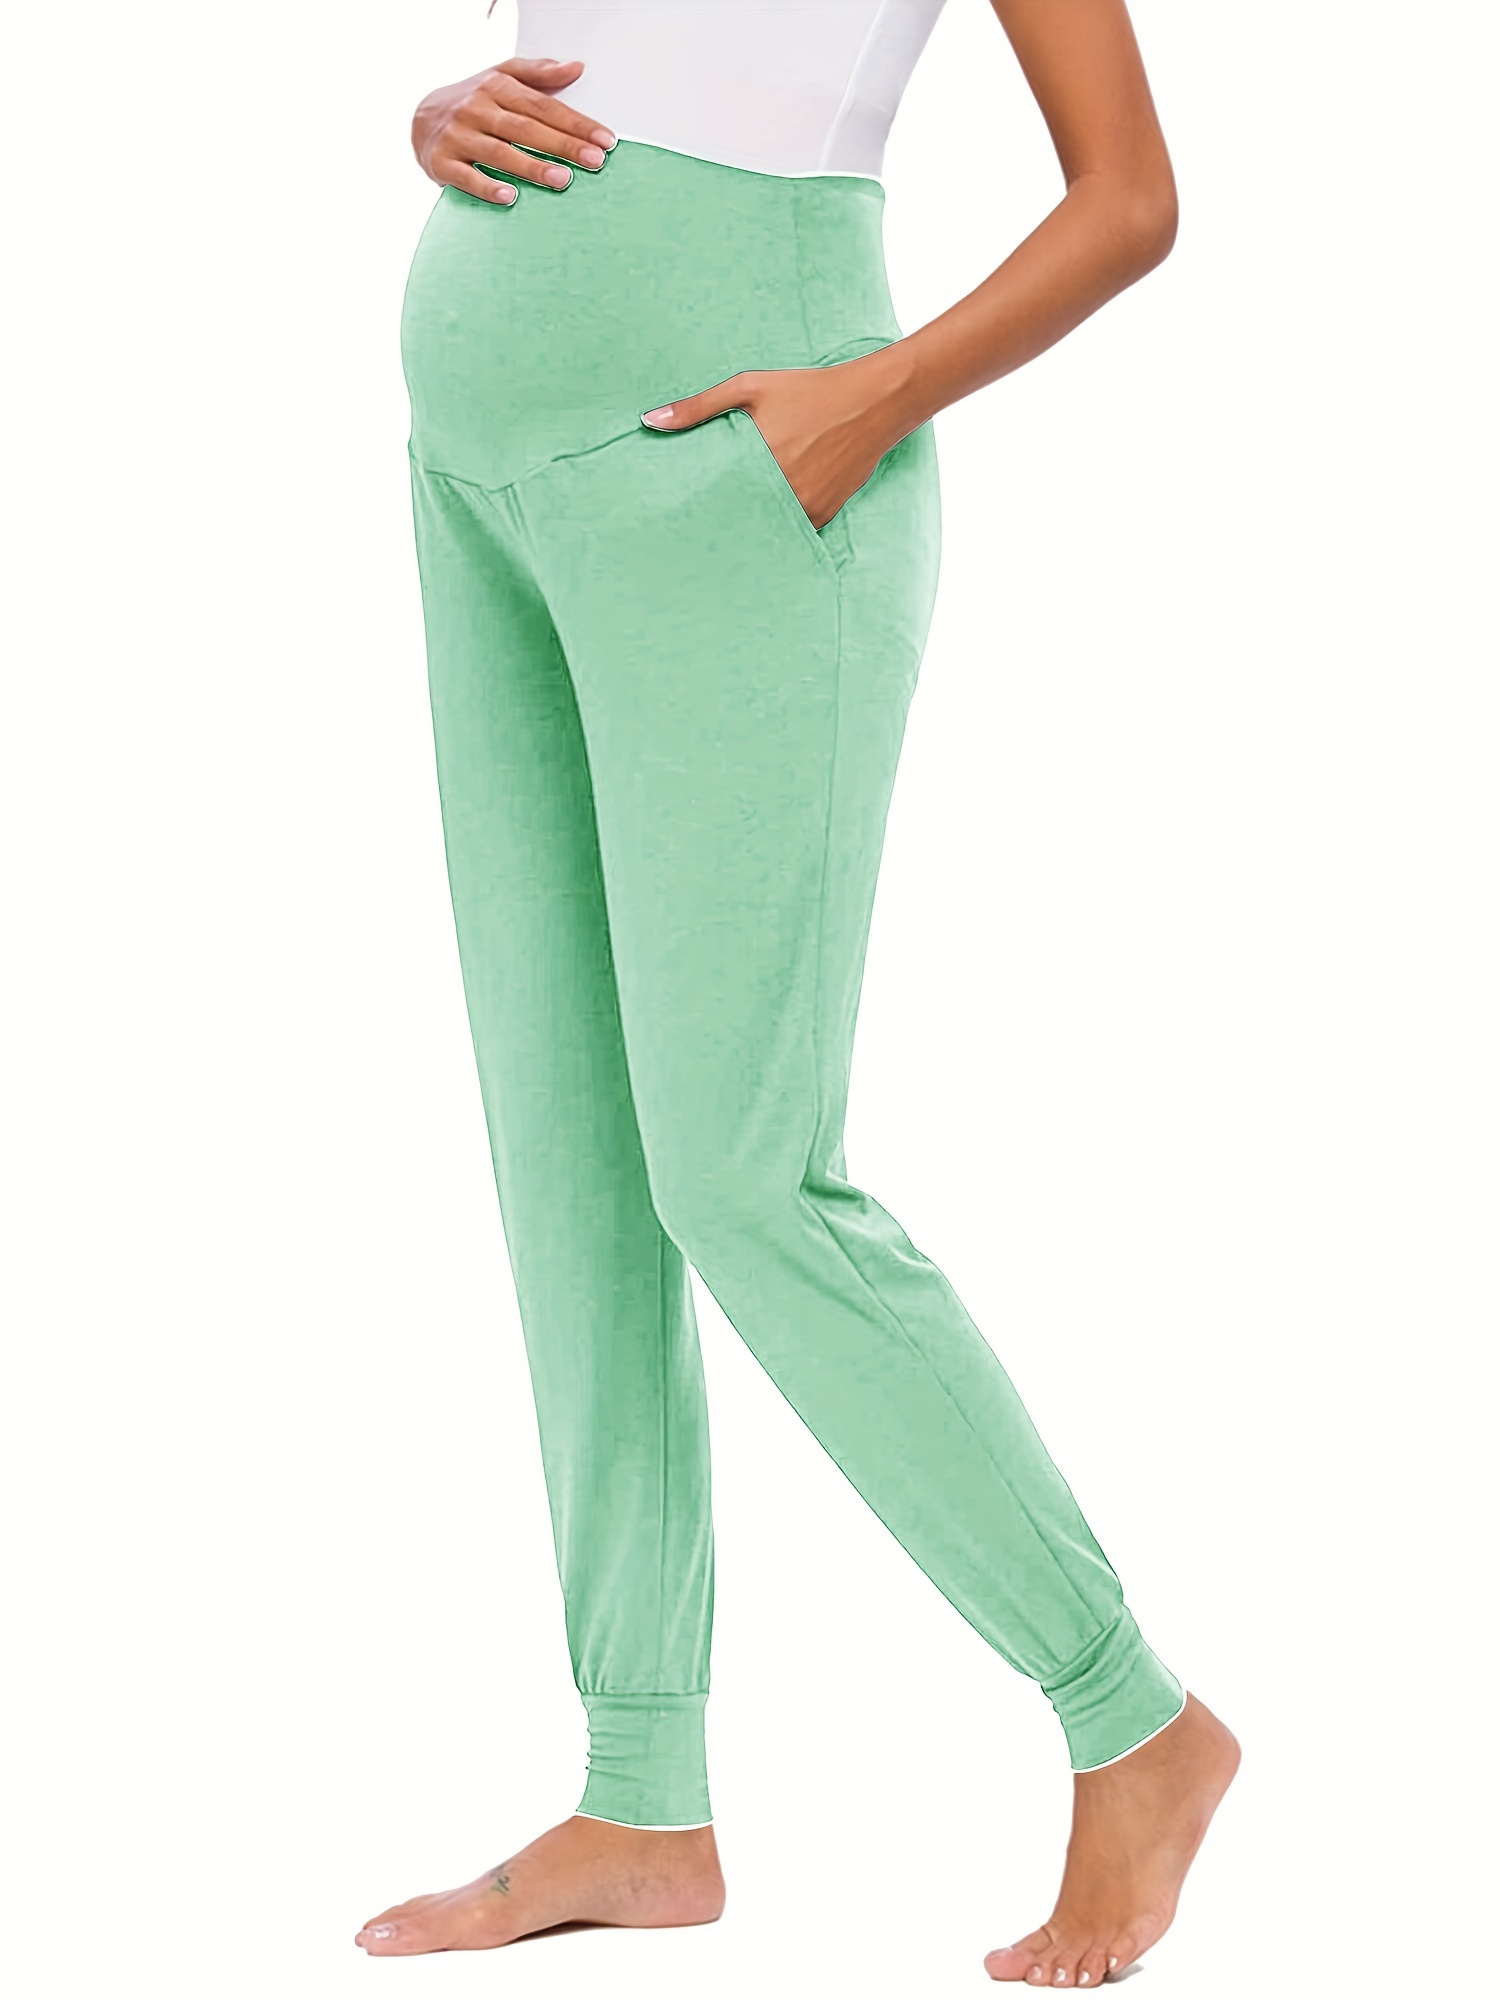 Maternity Pants with Pockets/Stretchy Casual Workout Maternity Lounge Pants  Pregnancy and Postpartum